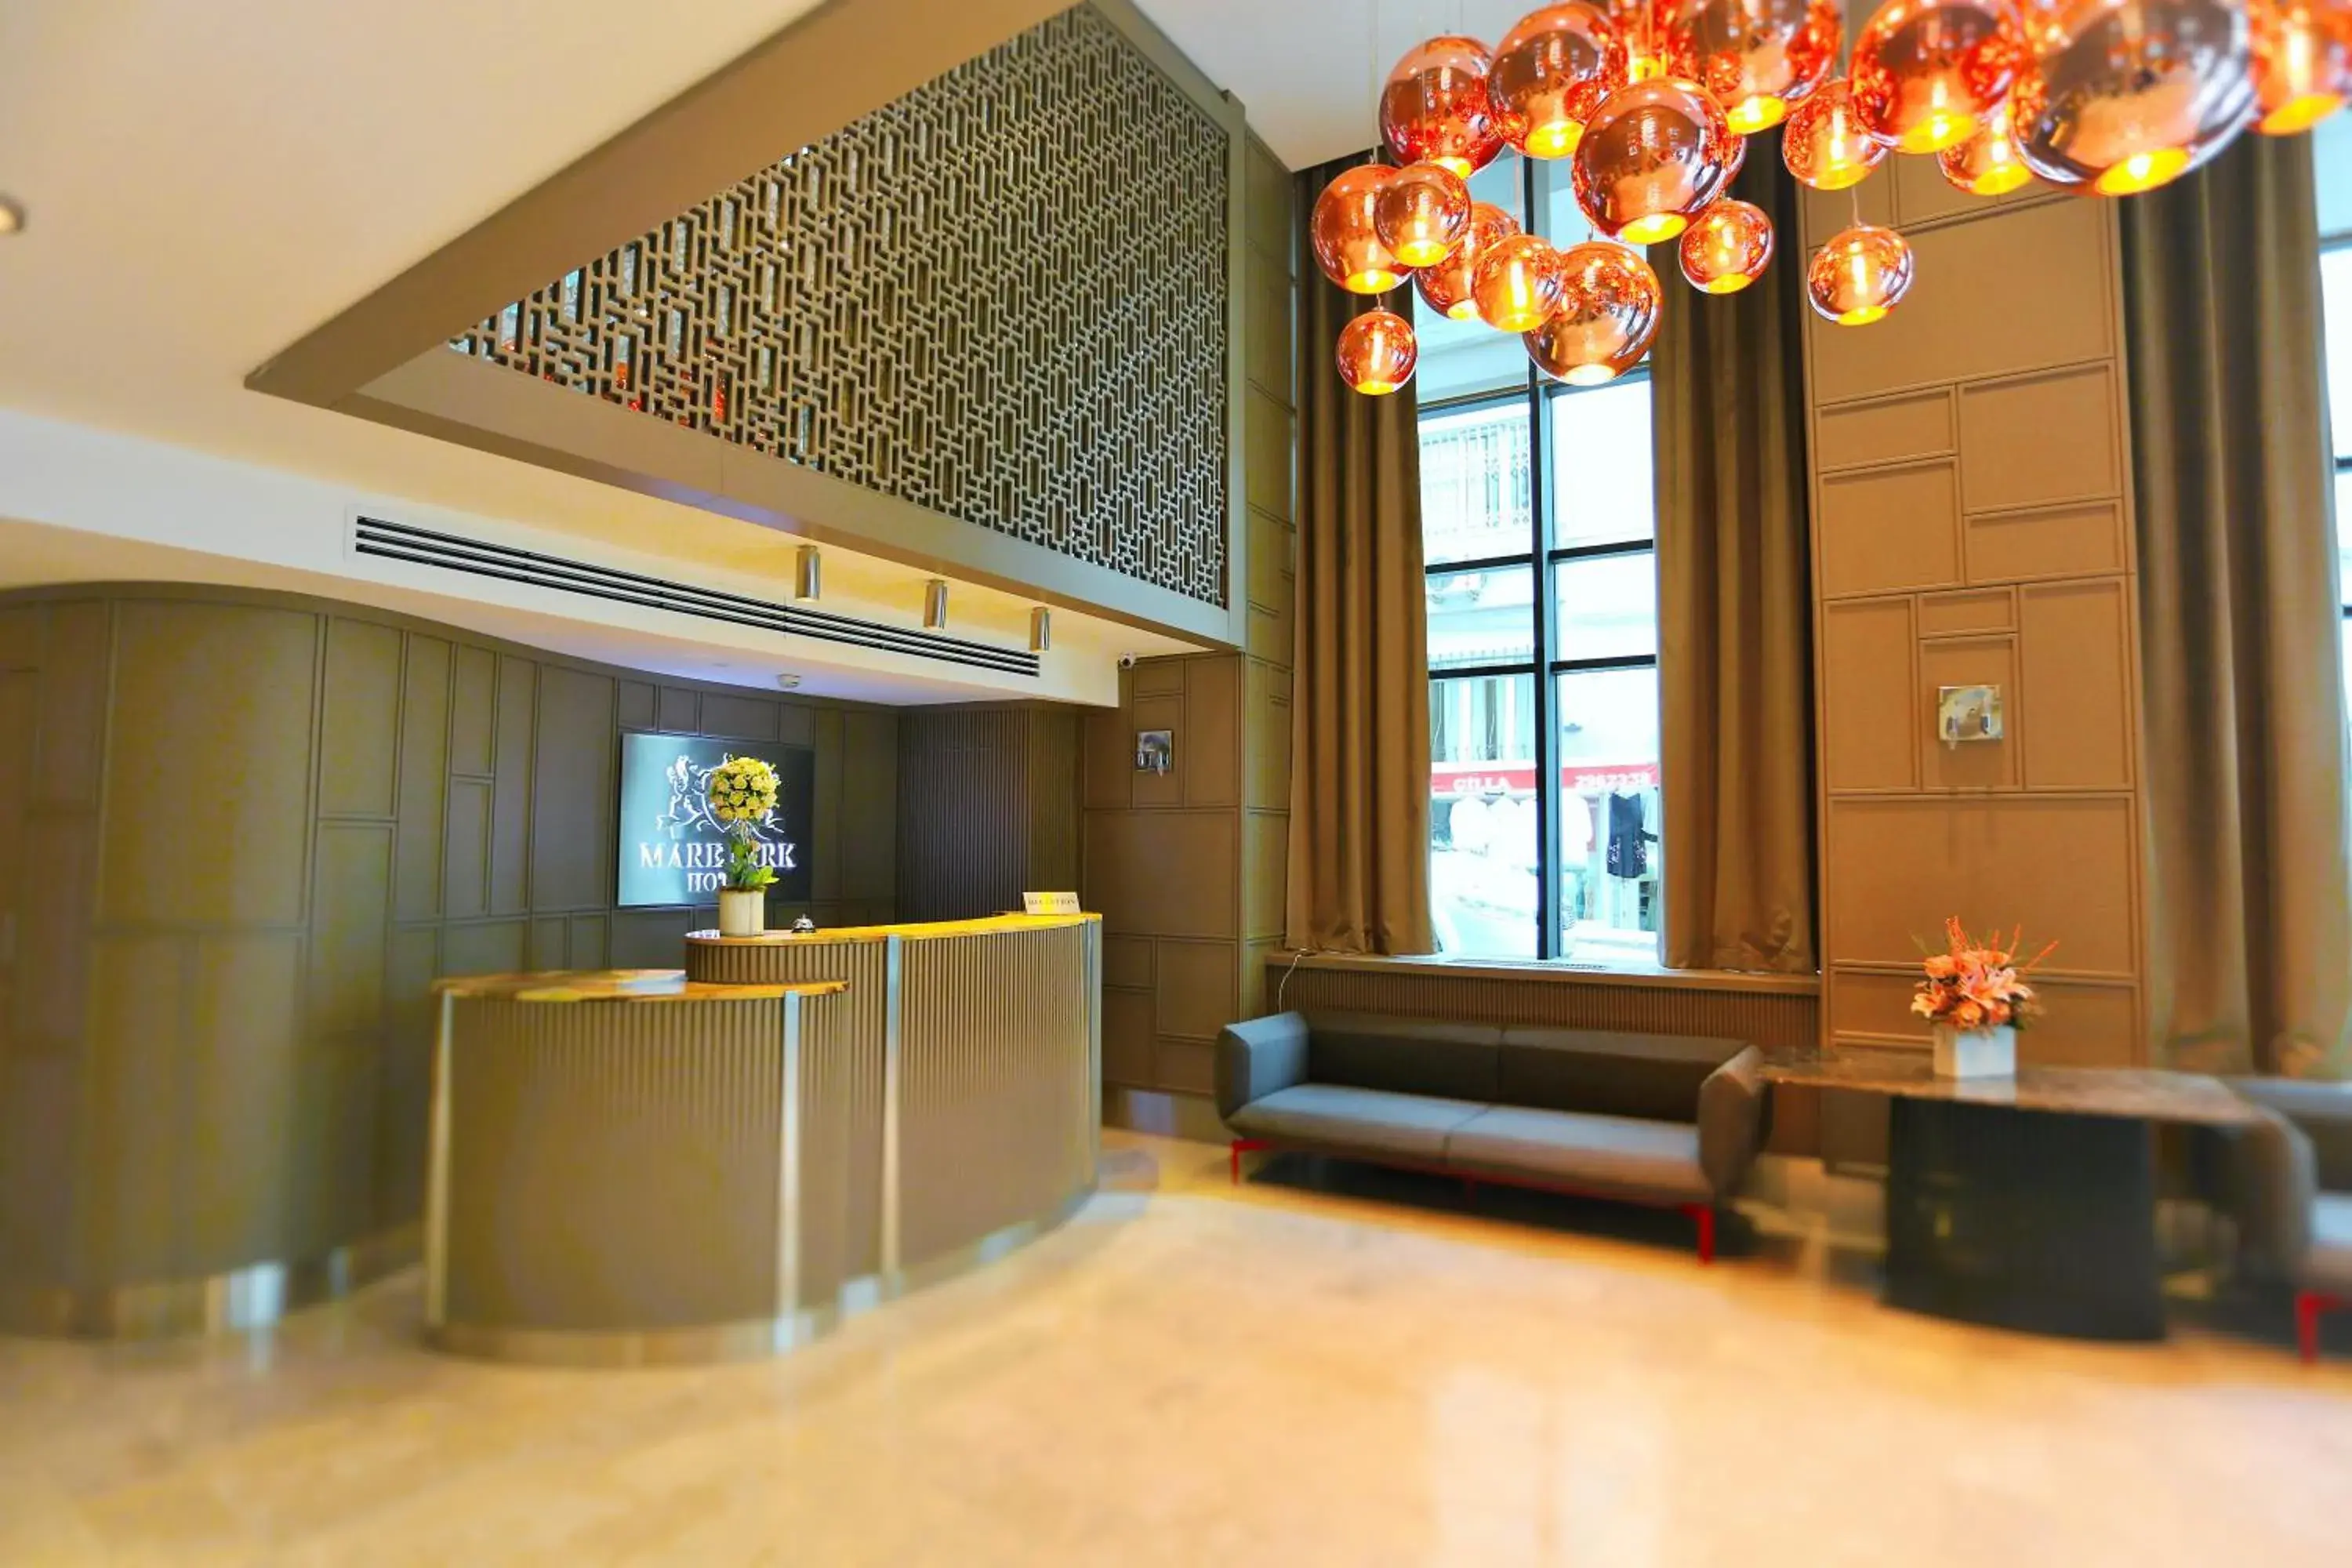 Lobby or reception in MARE PARK Hotel & SPA